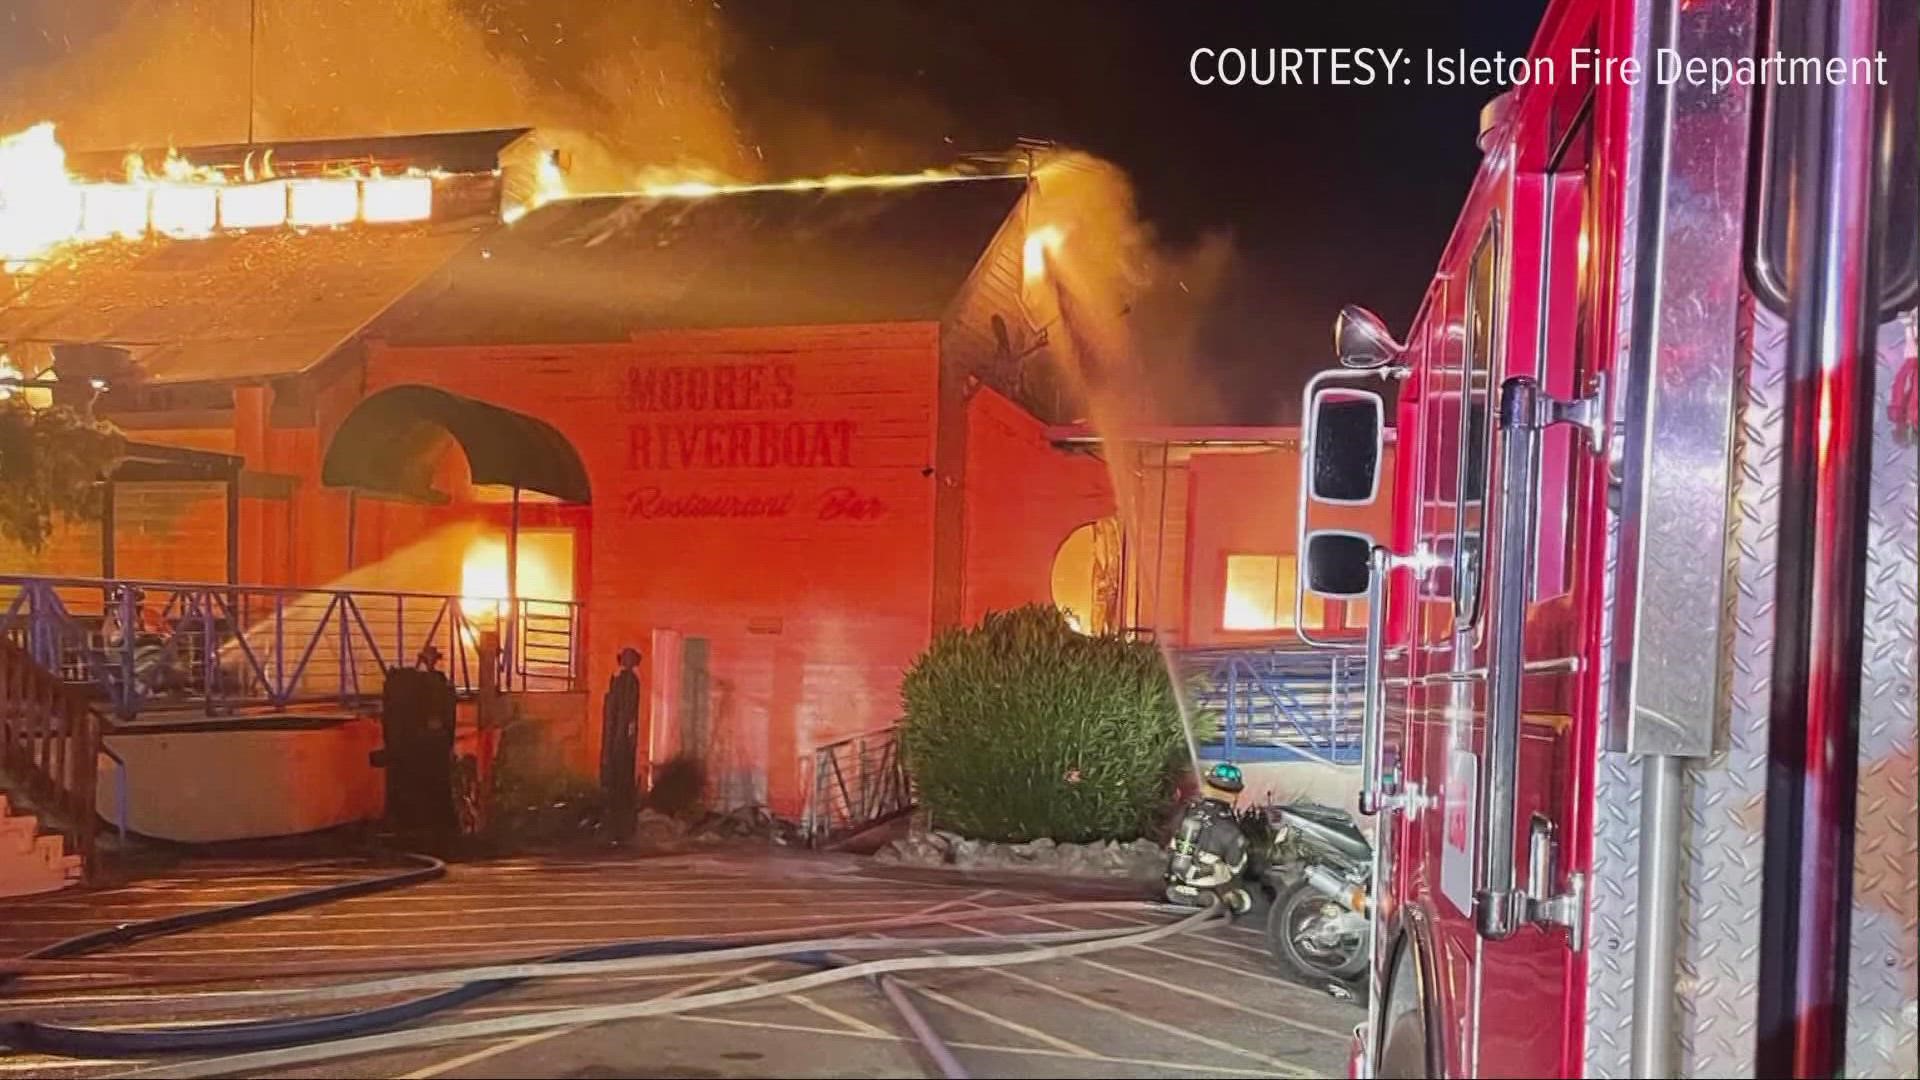 River Delta Fire District said when firefighters arrived at the scene, there were heavy flames coming through the roof of the Moore's Riverboat Restaurant.